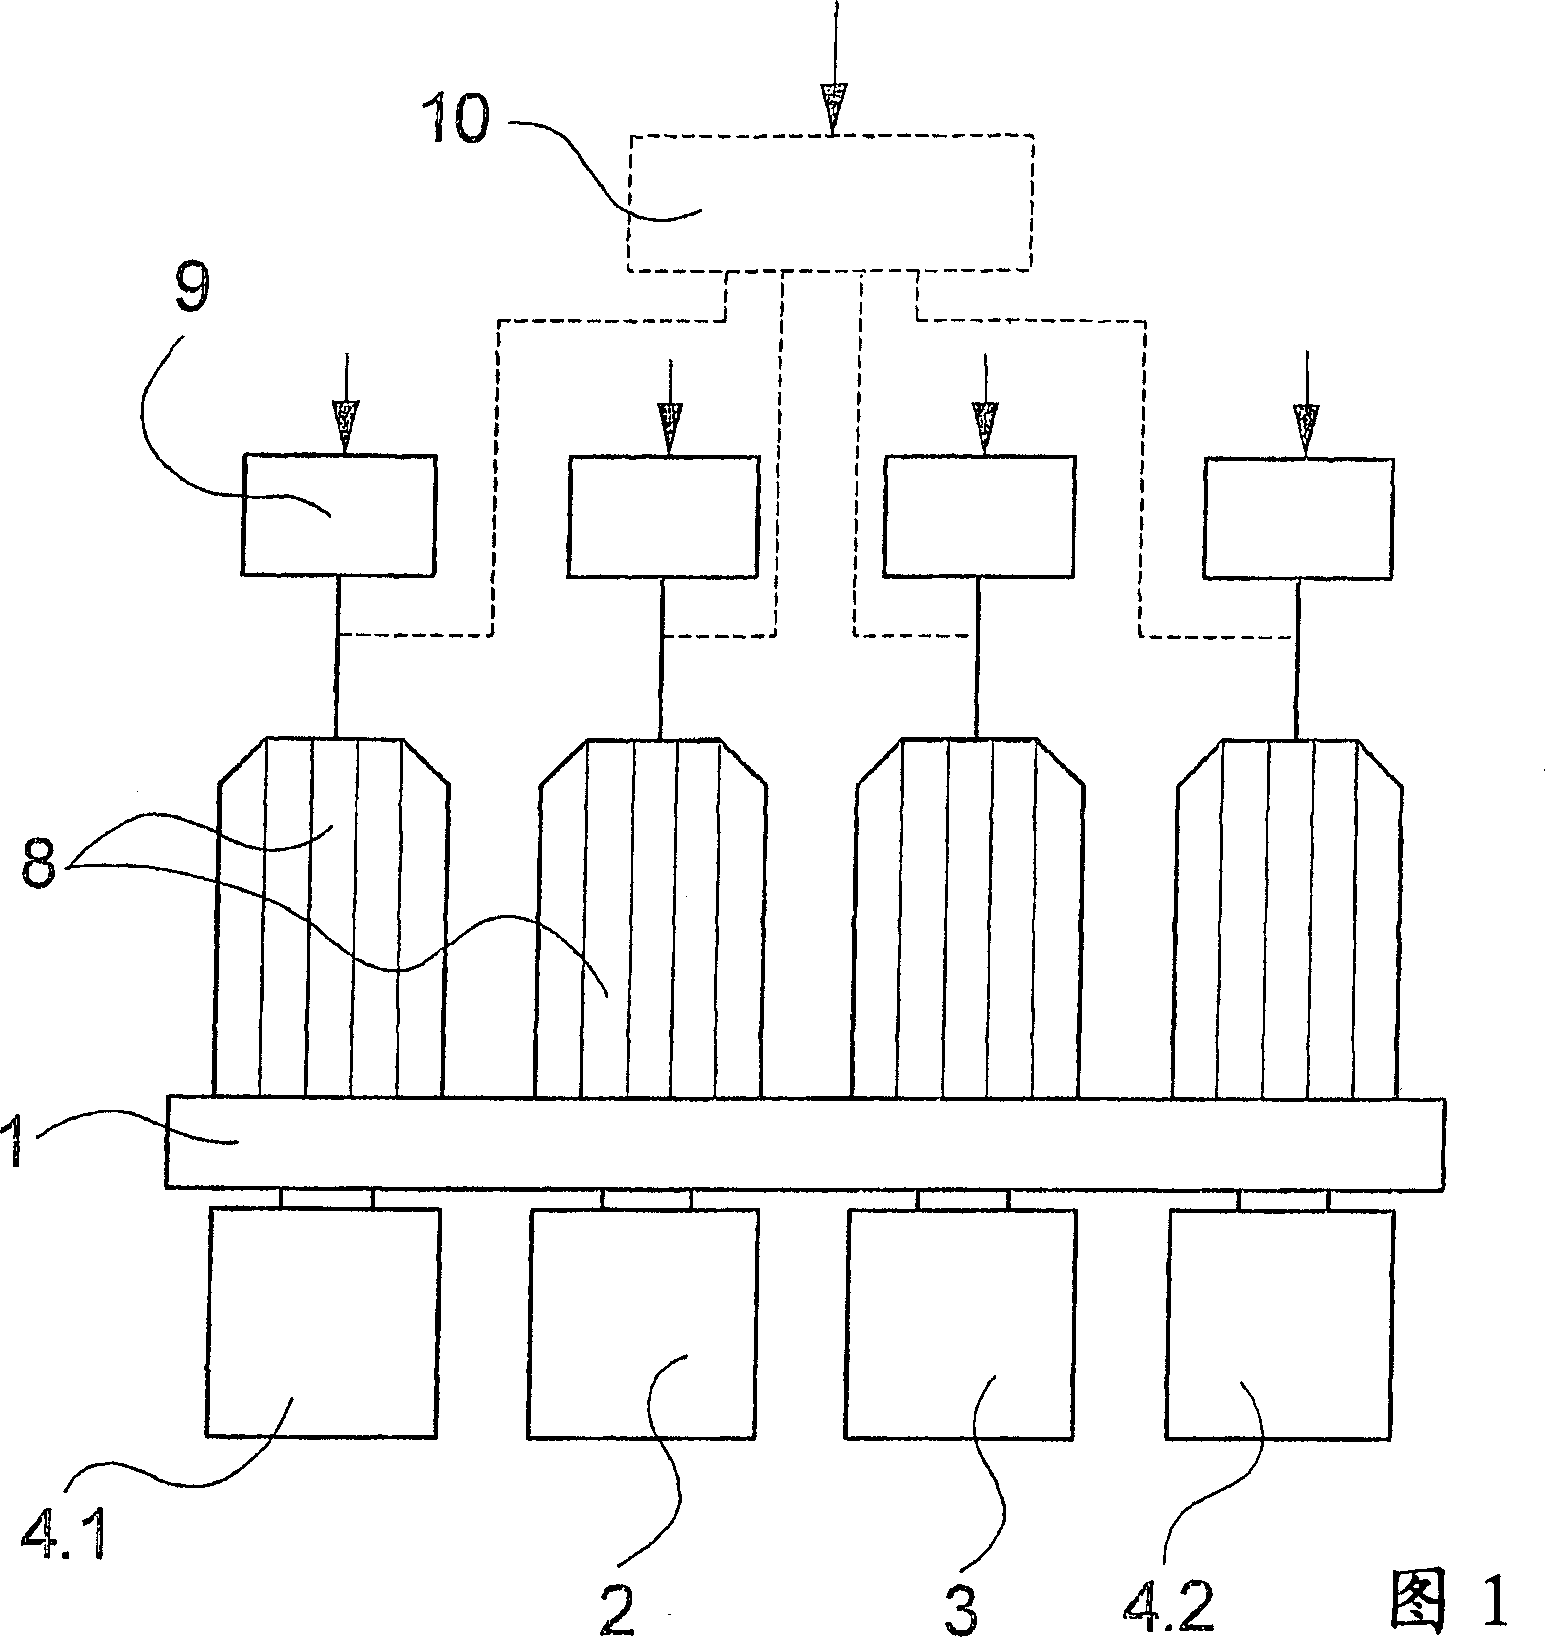 Device for guiding, conveying, or treating a fiber cable